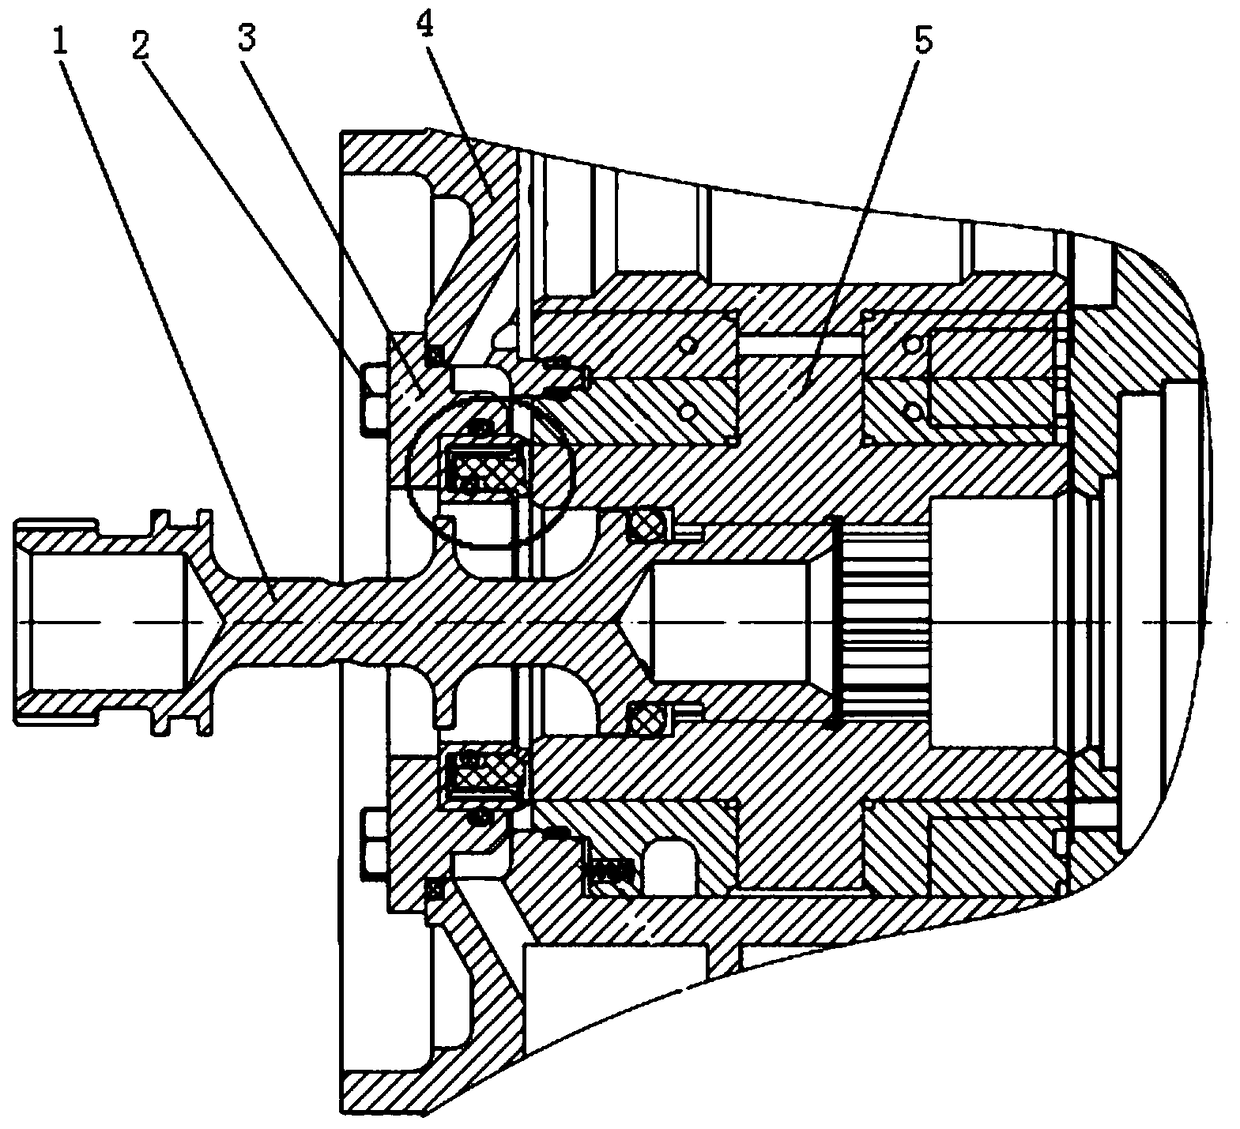 An end face sealing structure of a fuel pump shaft tail